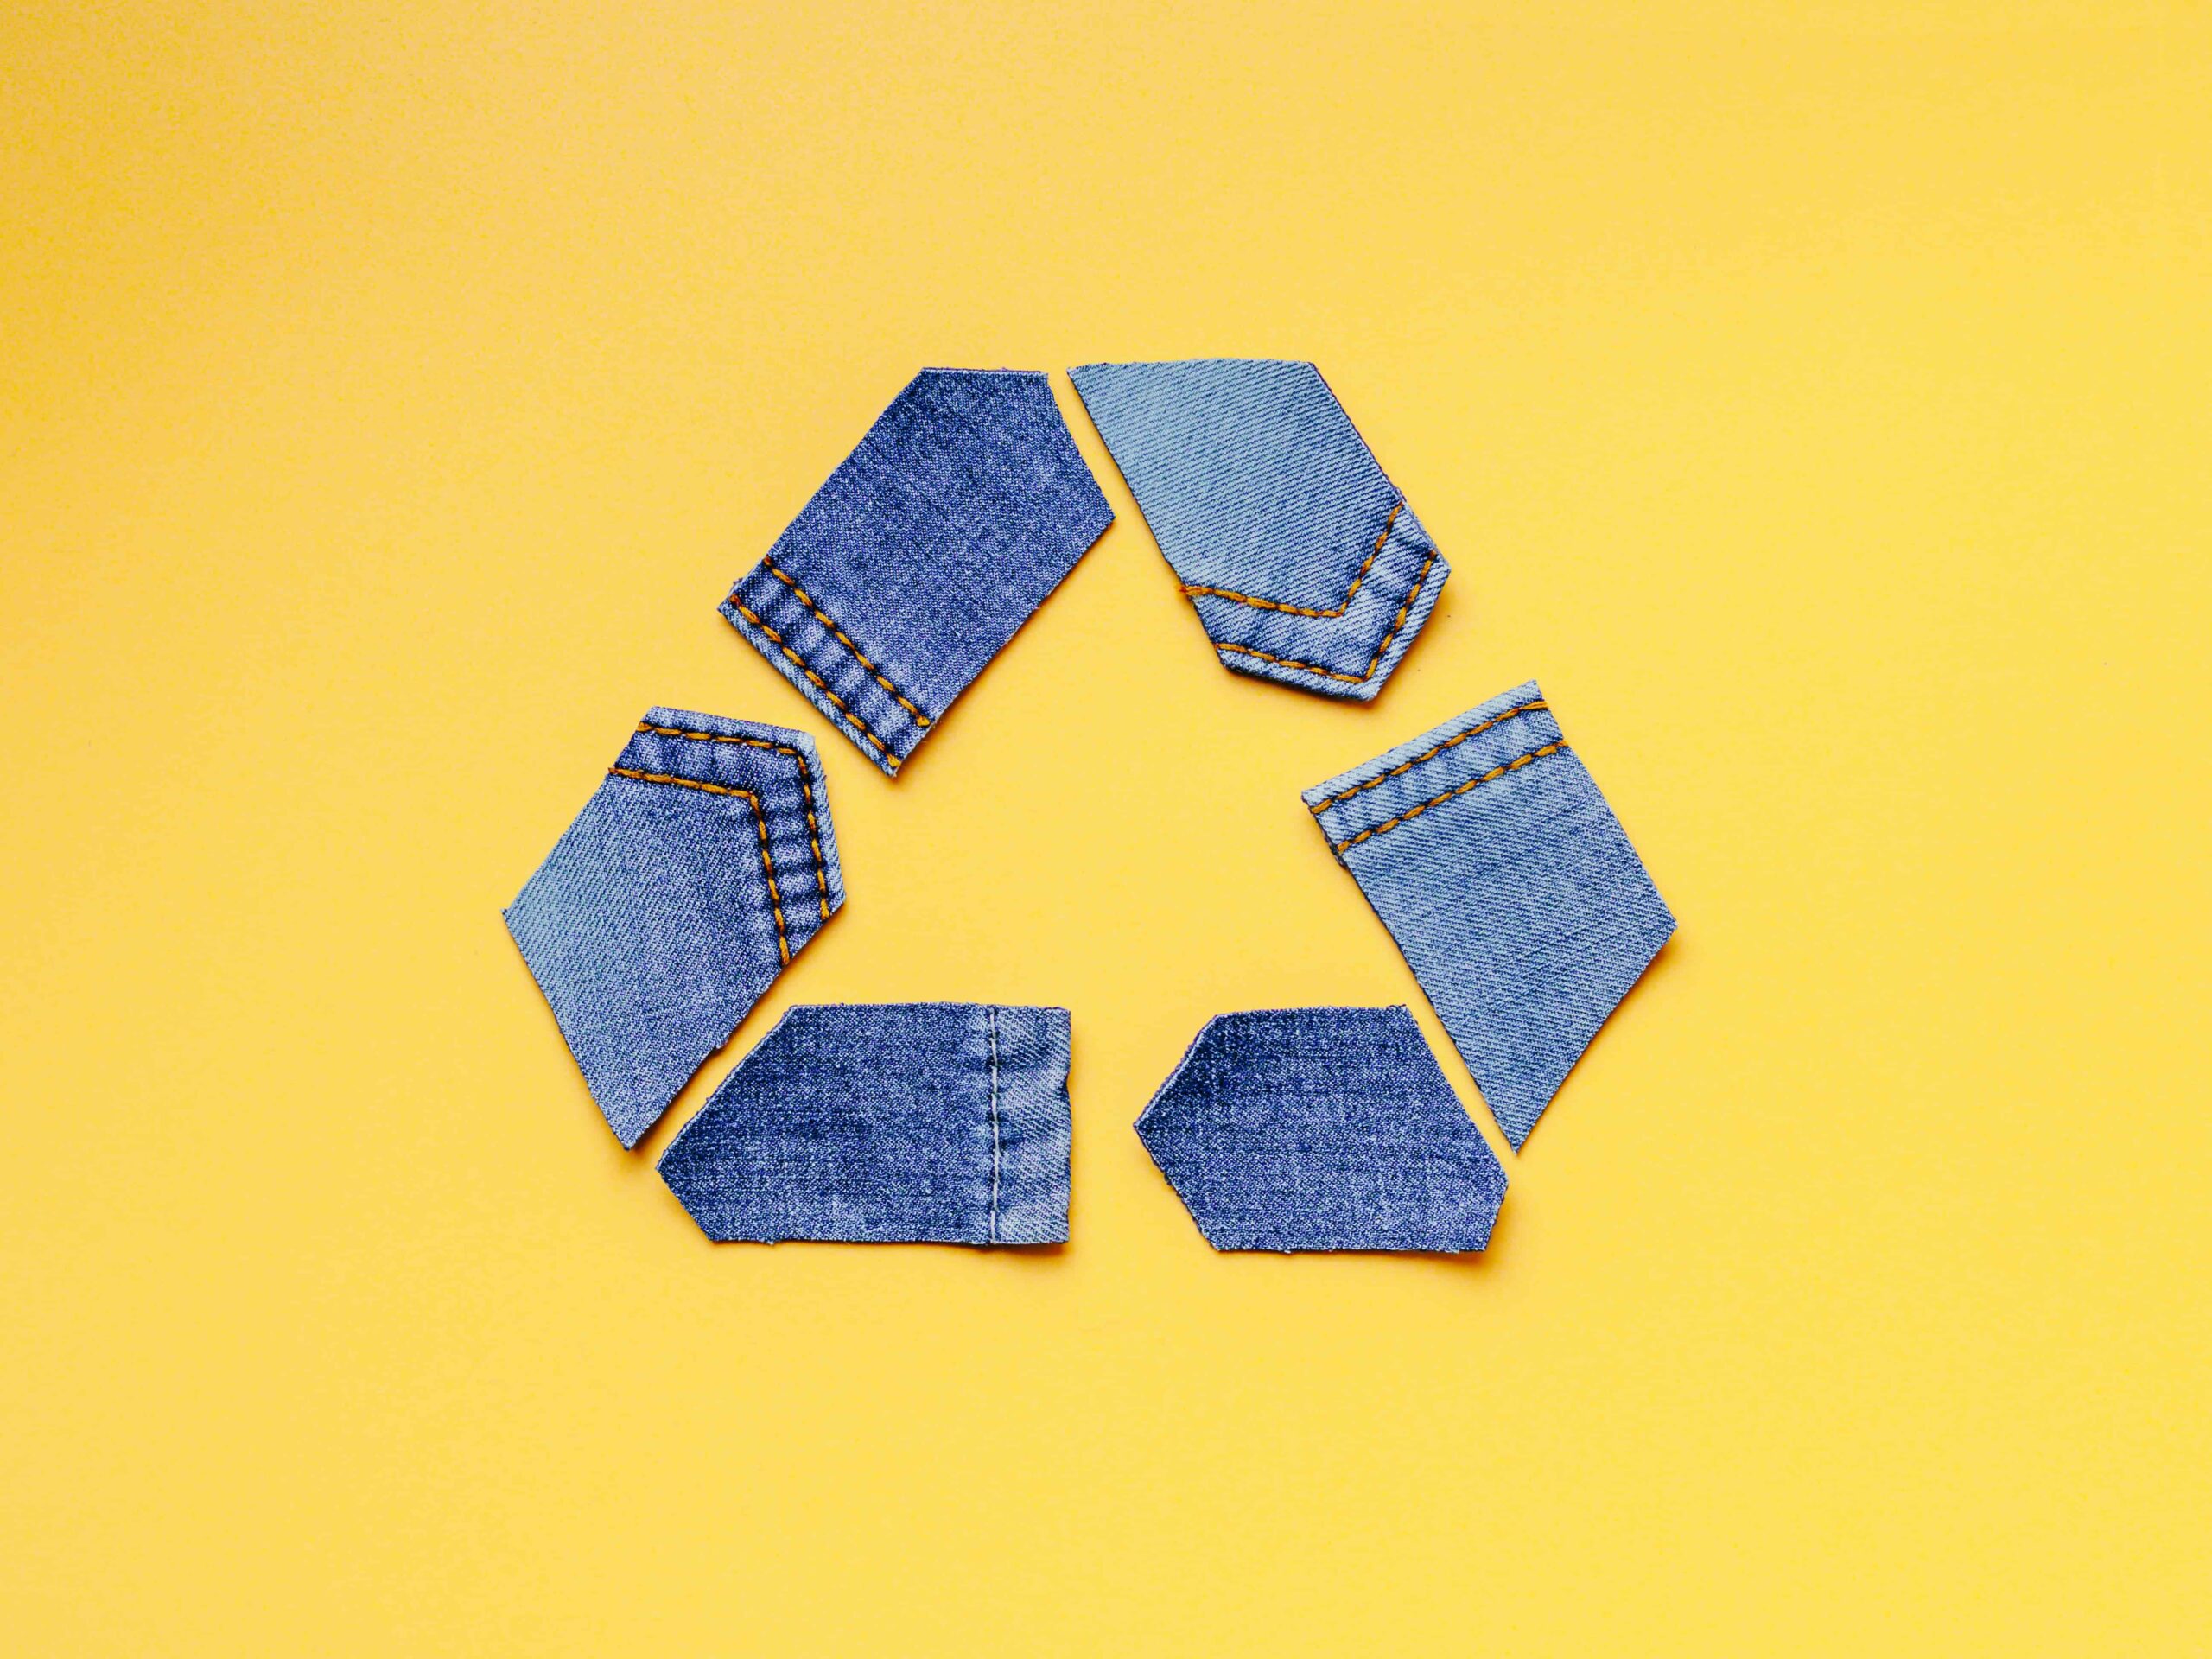 6 Interesting Products That Can Be Made from Recycled Paper Products